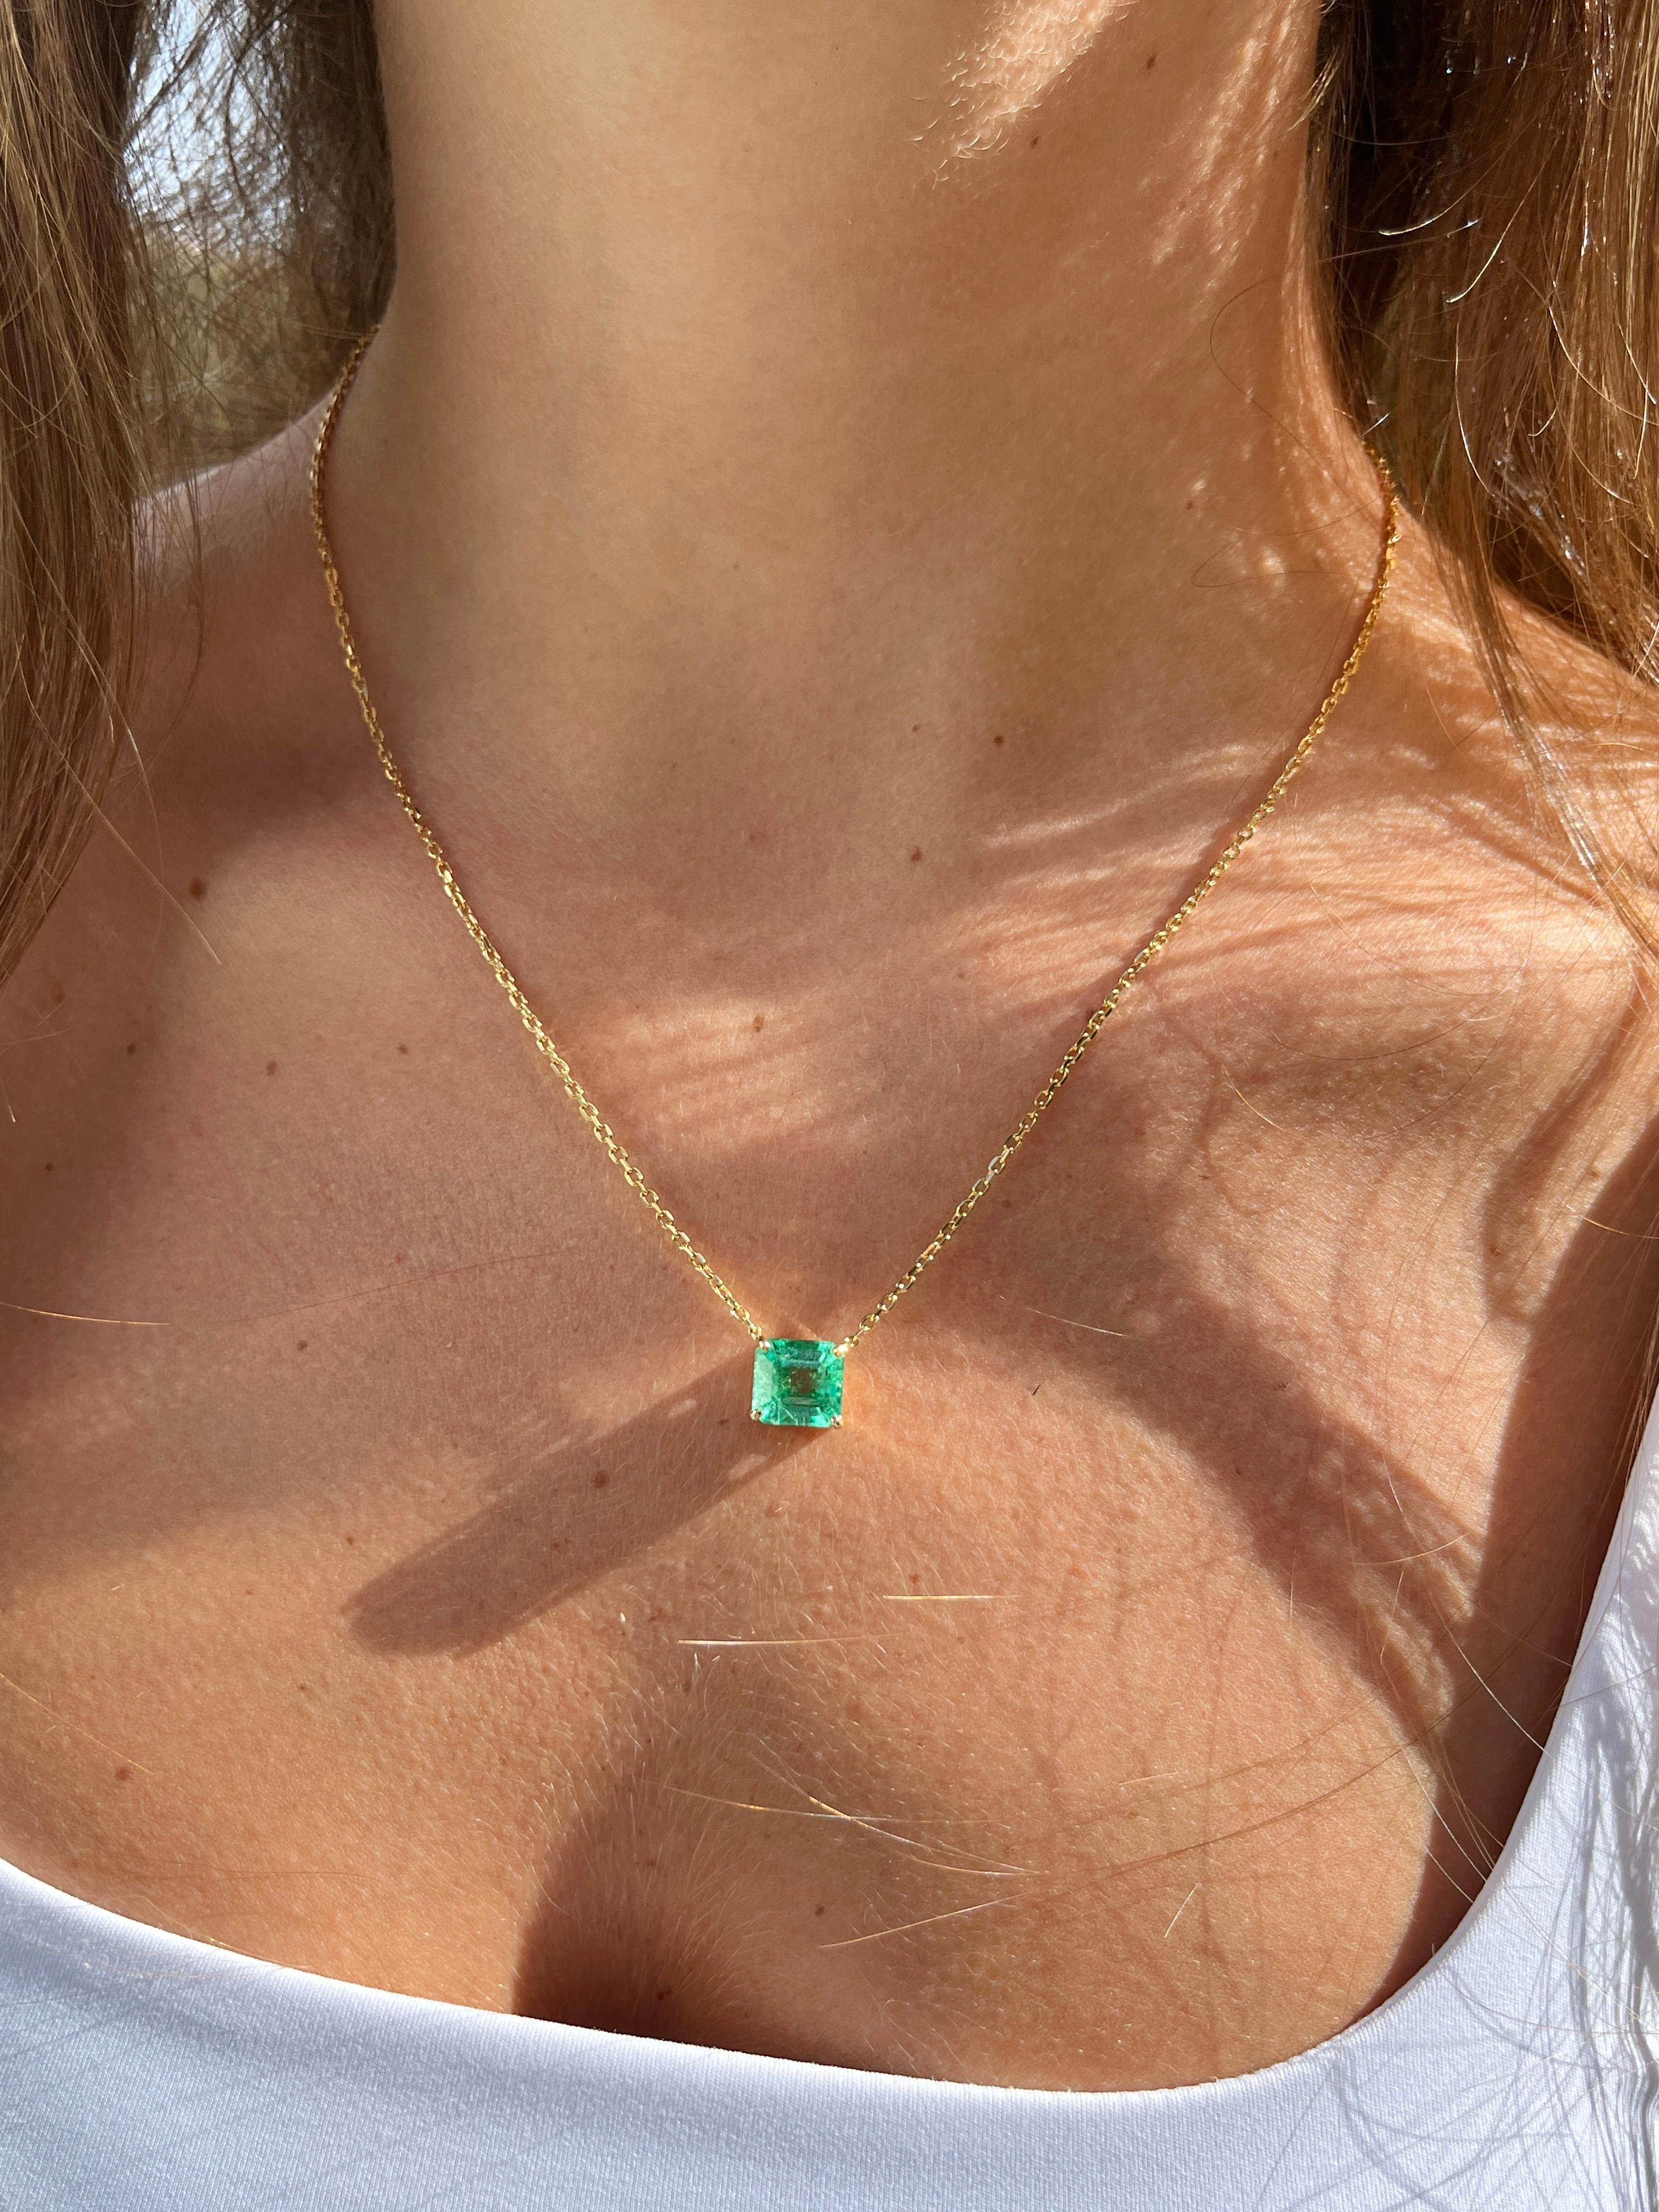 4.38 Carat Colombian Emerald in 18K Gold Floating Connecting Chain Necklace For Sale 1